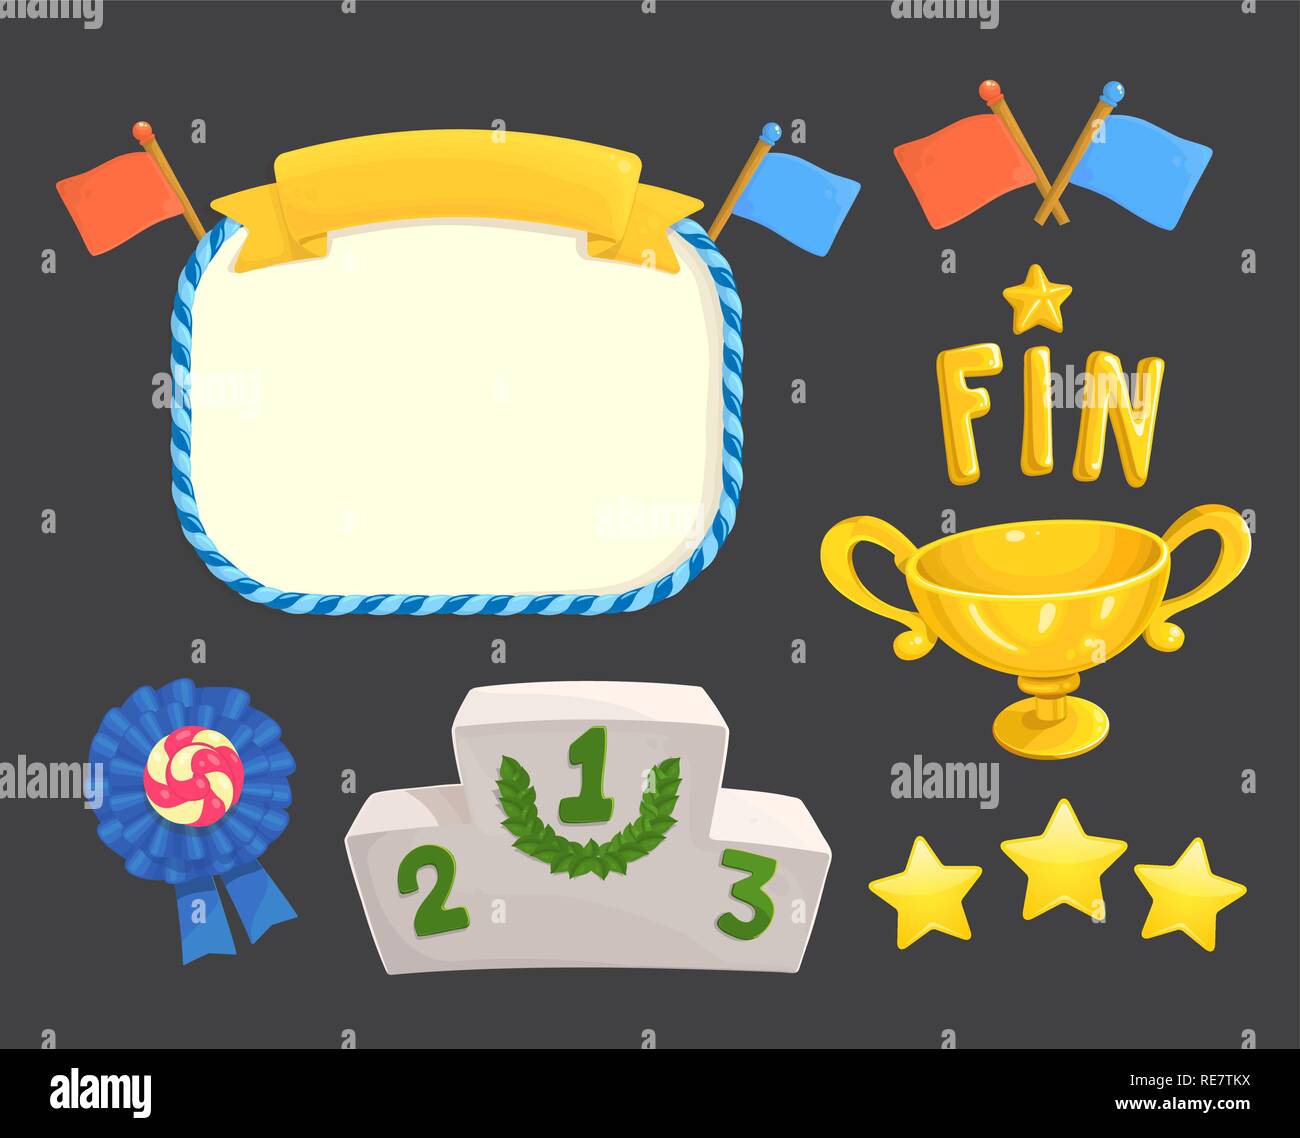 Game rating icons with stars game element, flags, awards, gold cup, inscriptions for game ending and fin, level results icon Stock Vector